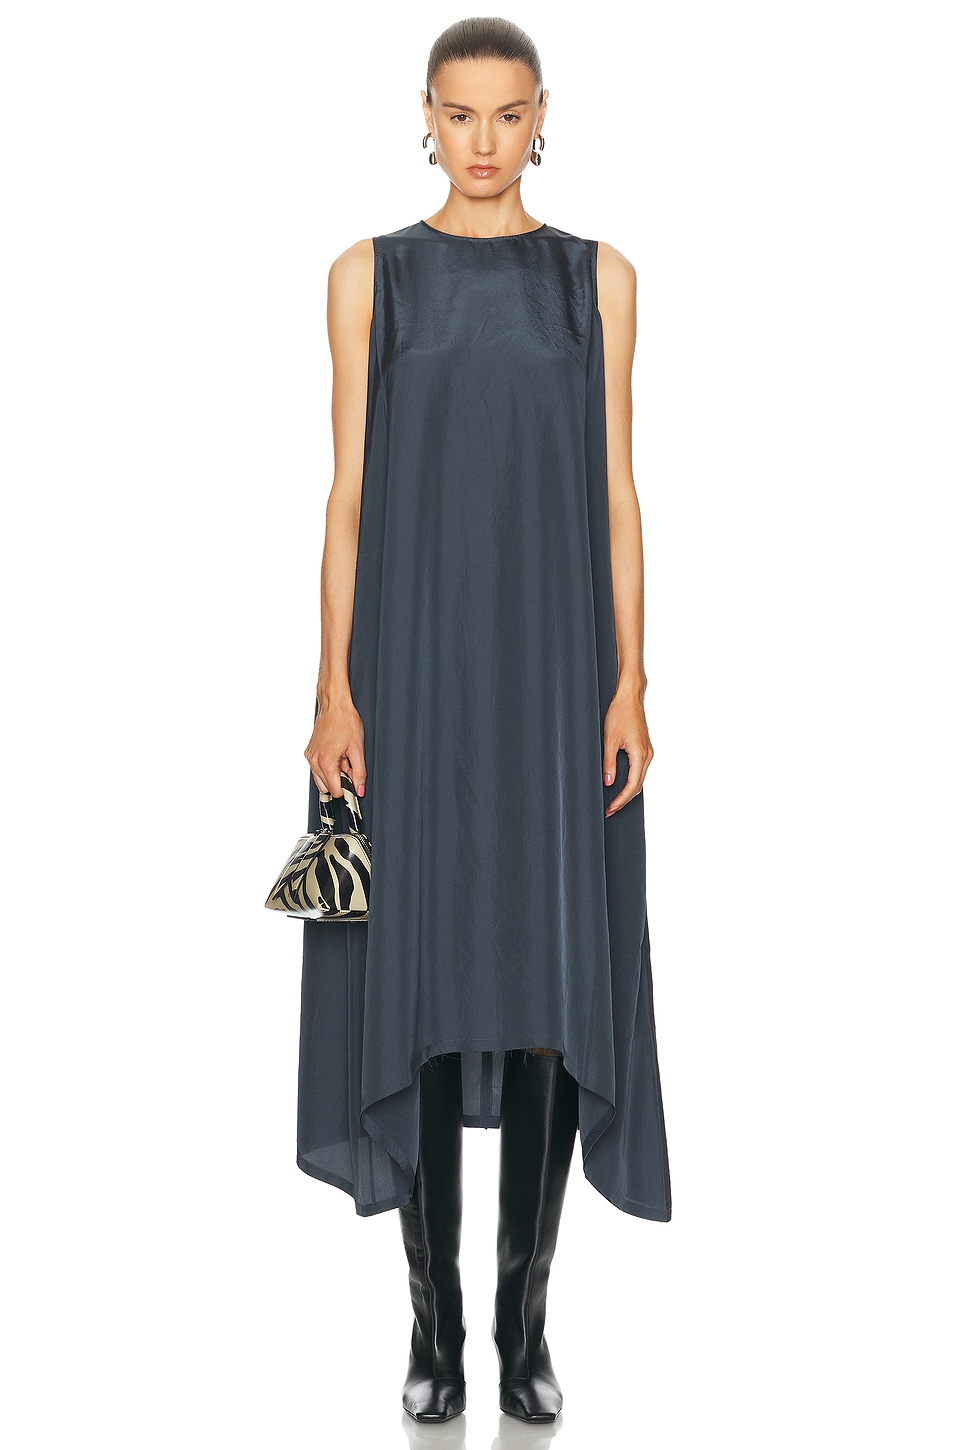 Image 1 of Acne Studios Summer Stripe Dress in Anthracite Grey